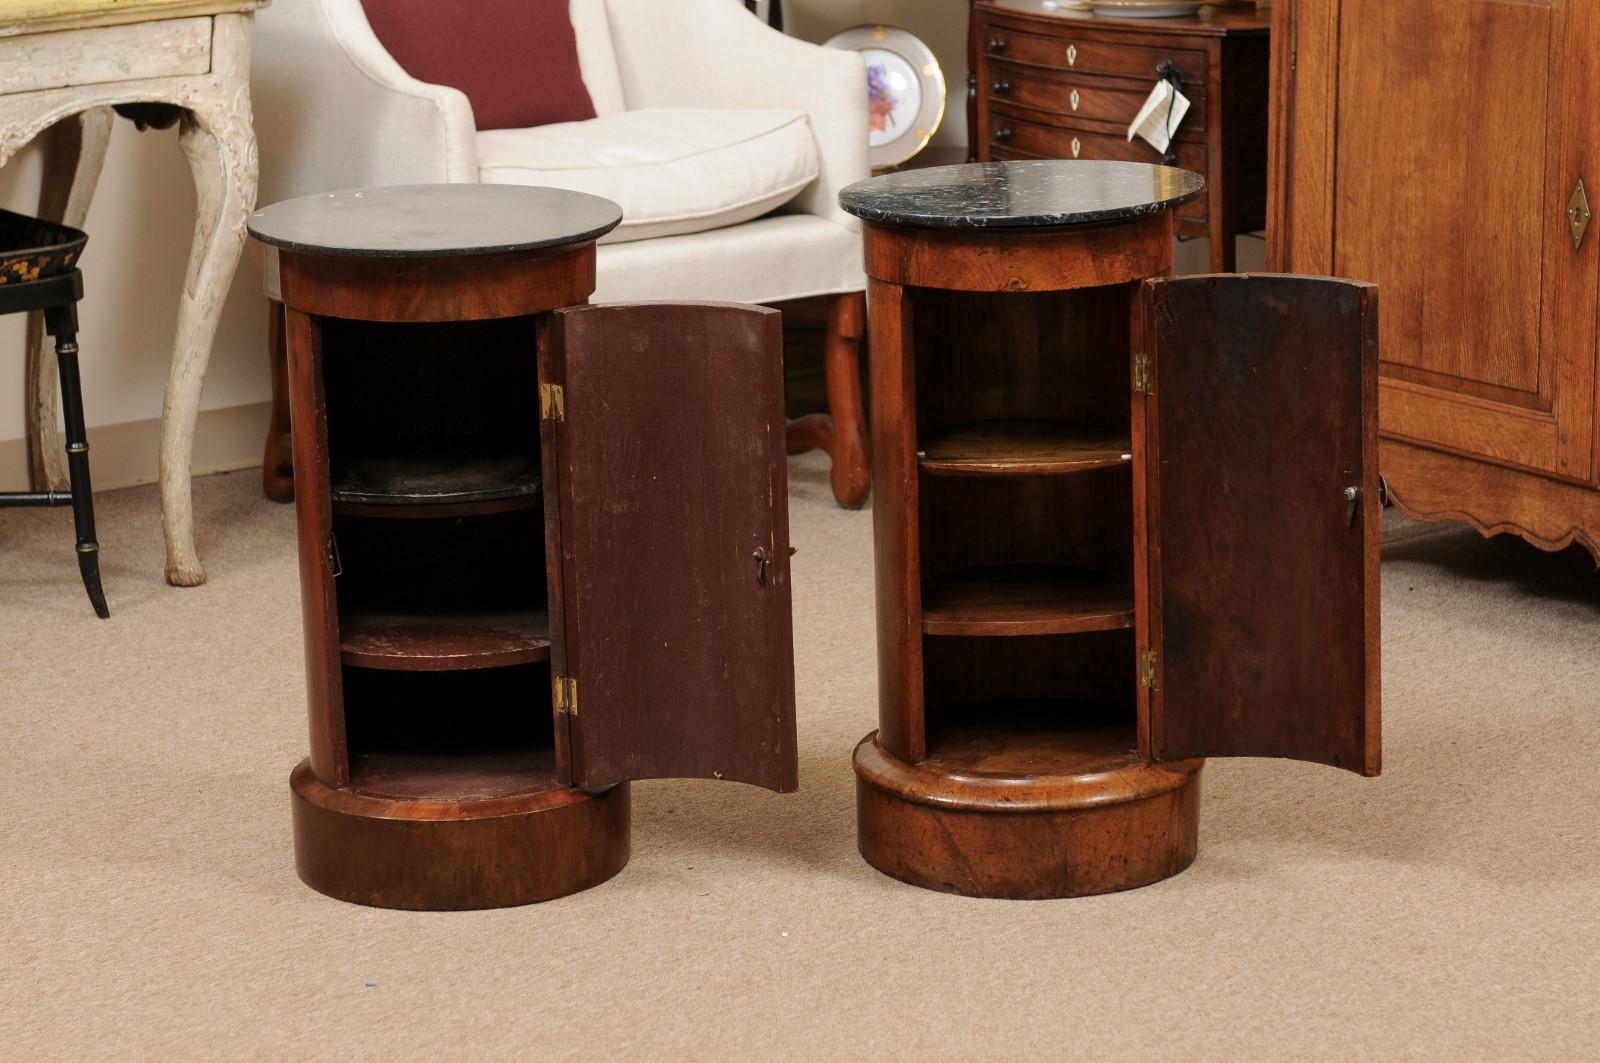 Matched Pair of Cylindrical Cabinets in Mahogany with Black Marble Tops 13